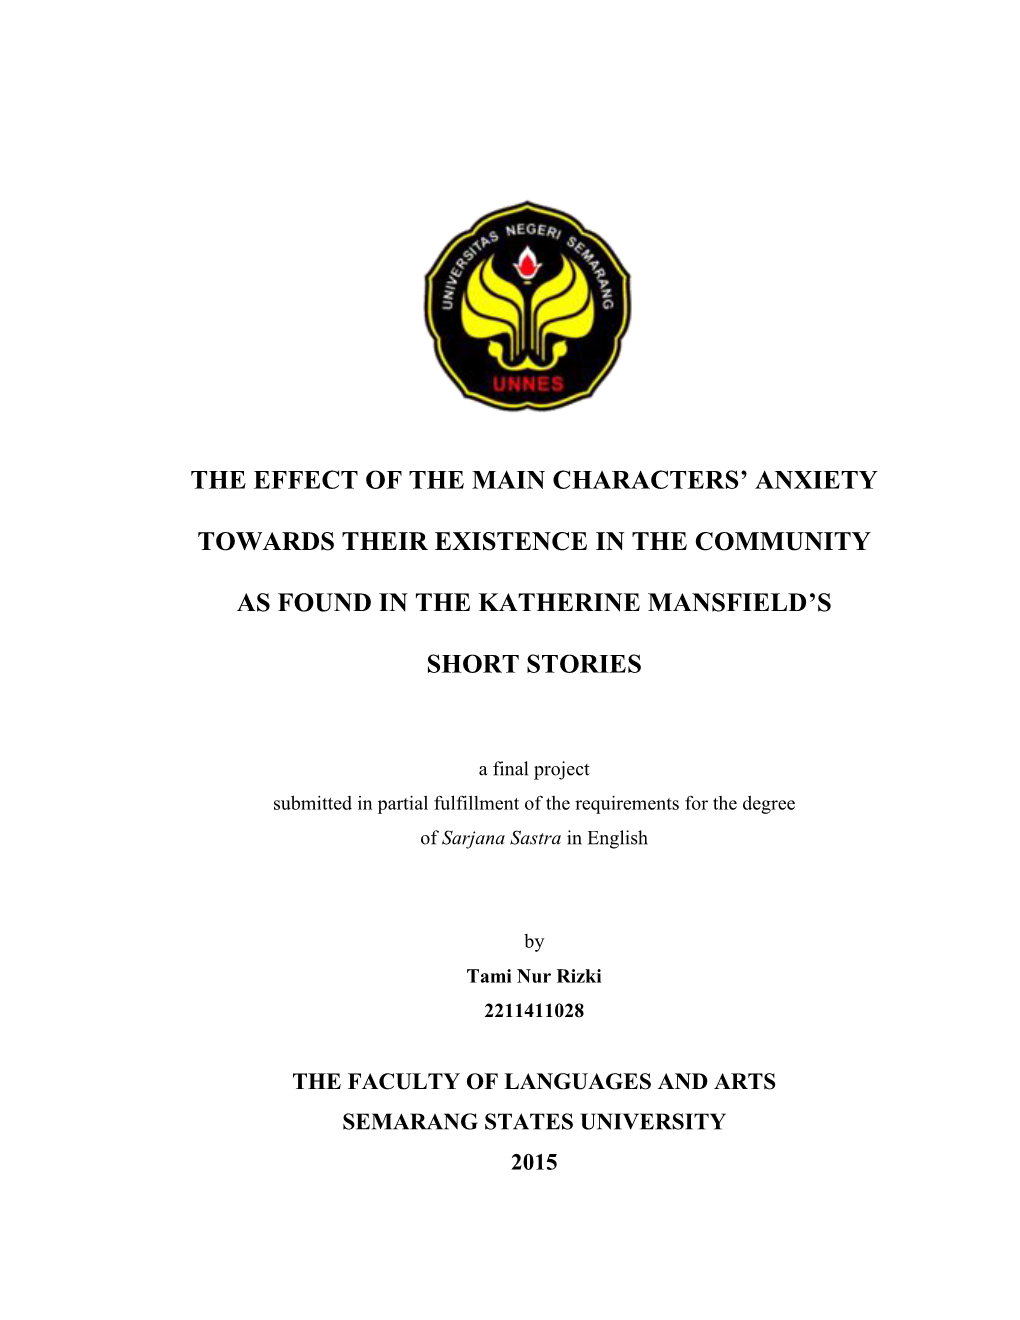 The Effect of the Main Characters' Anxiety Towards Their Existence In